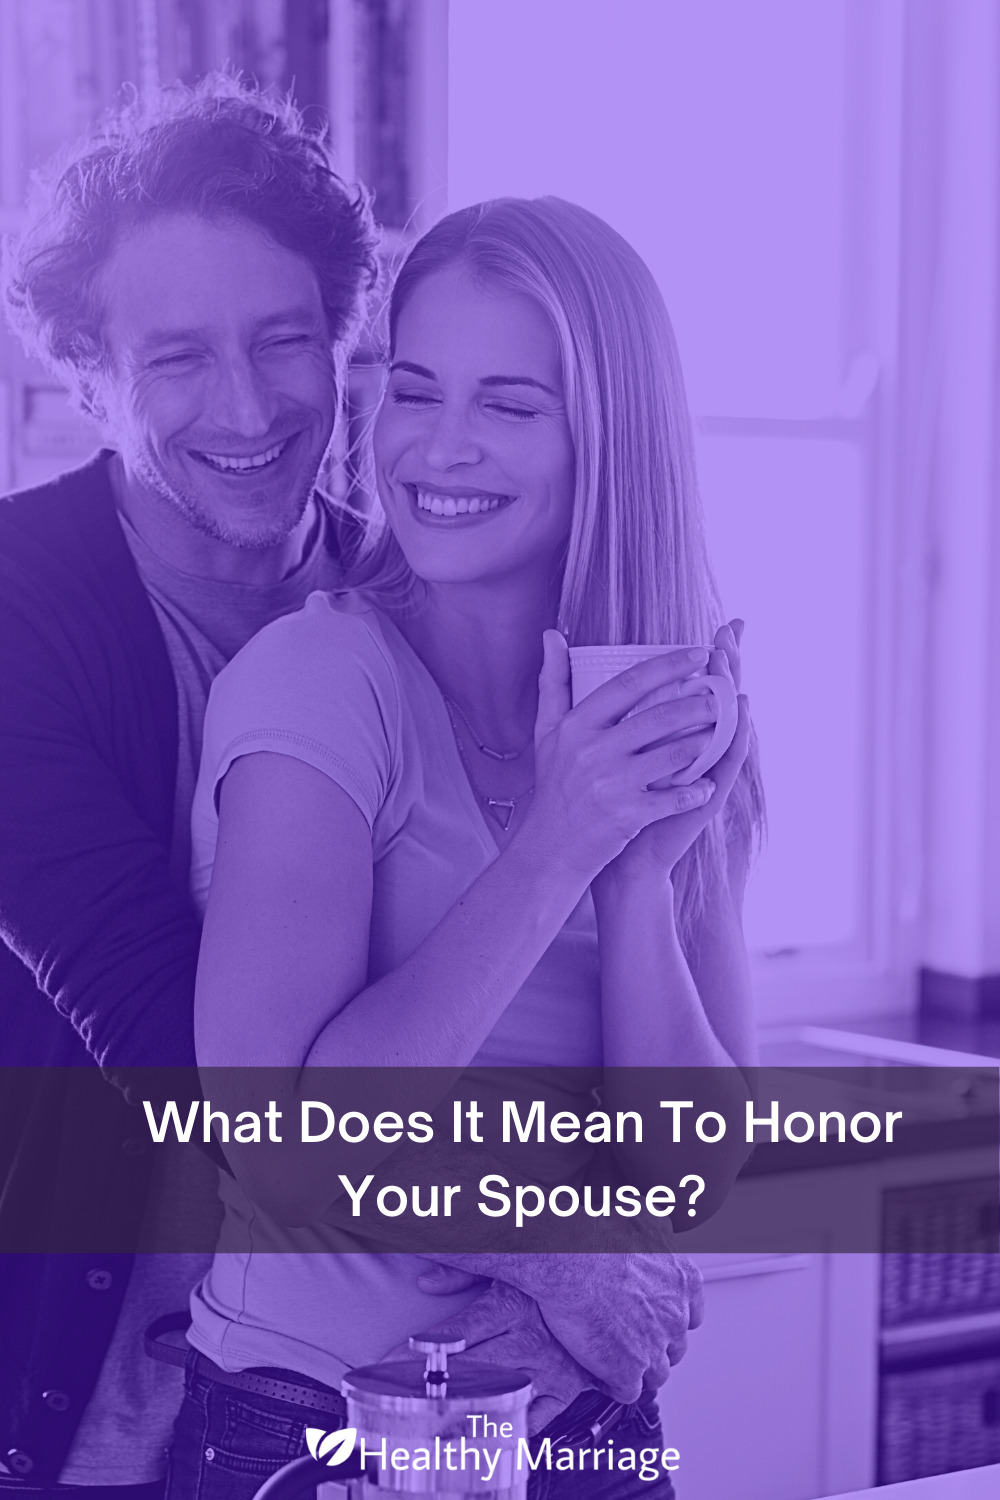 What does it mean to honor your spouse?